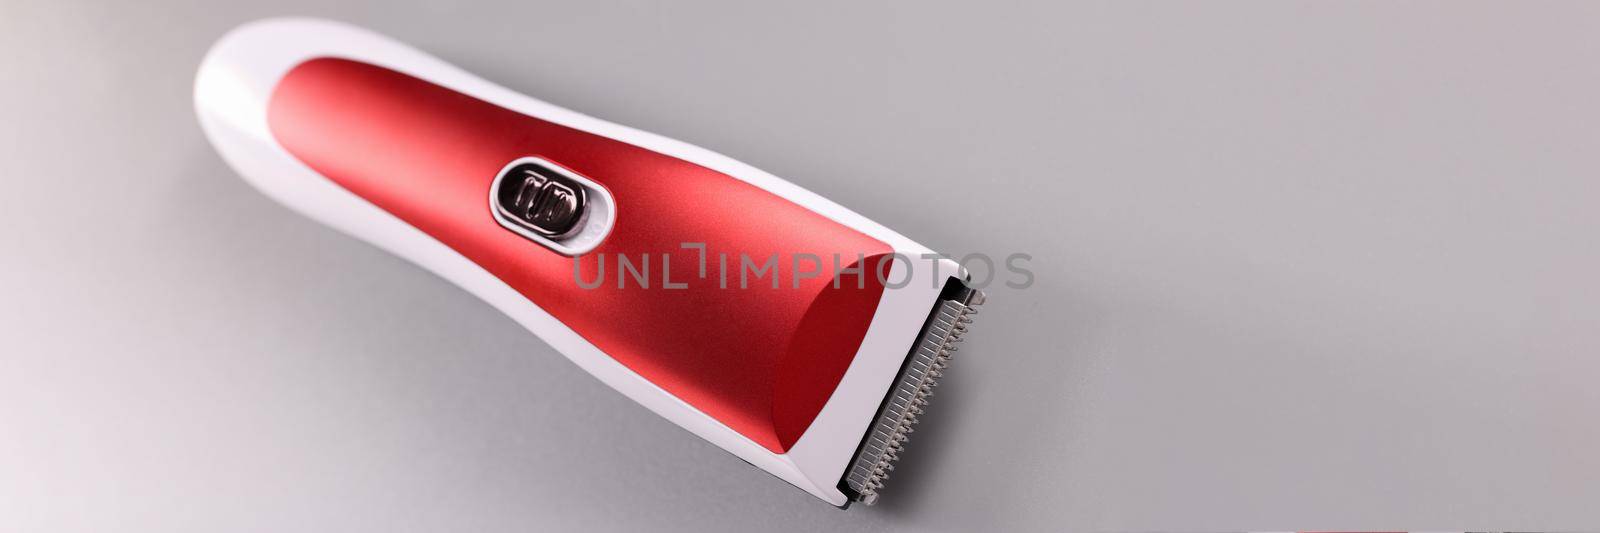 Electric razor for cutting hair on gray background. Home barber equipment and technology